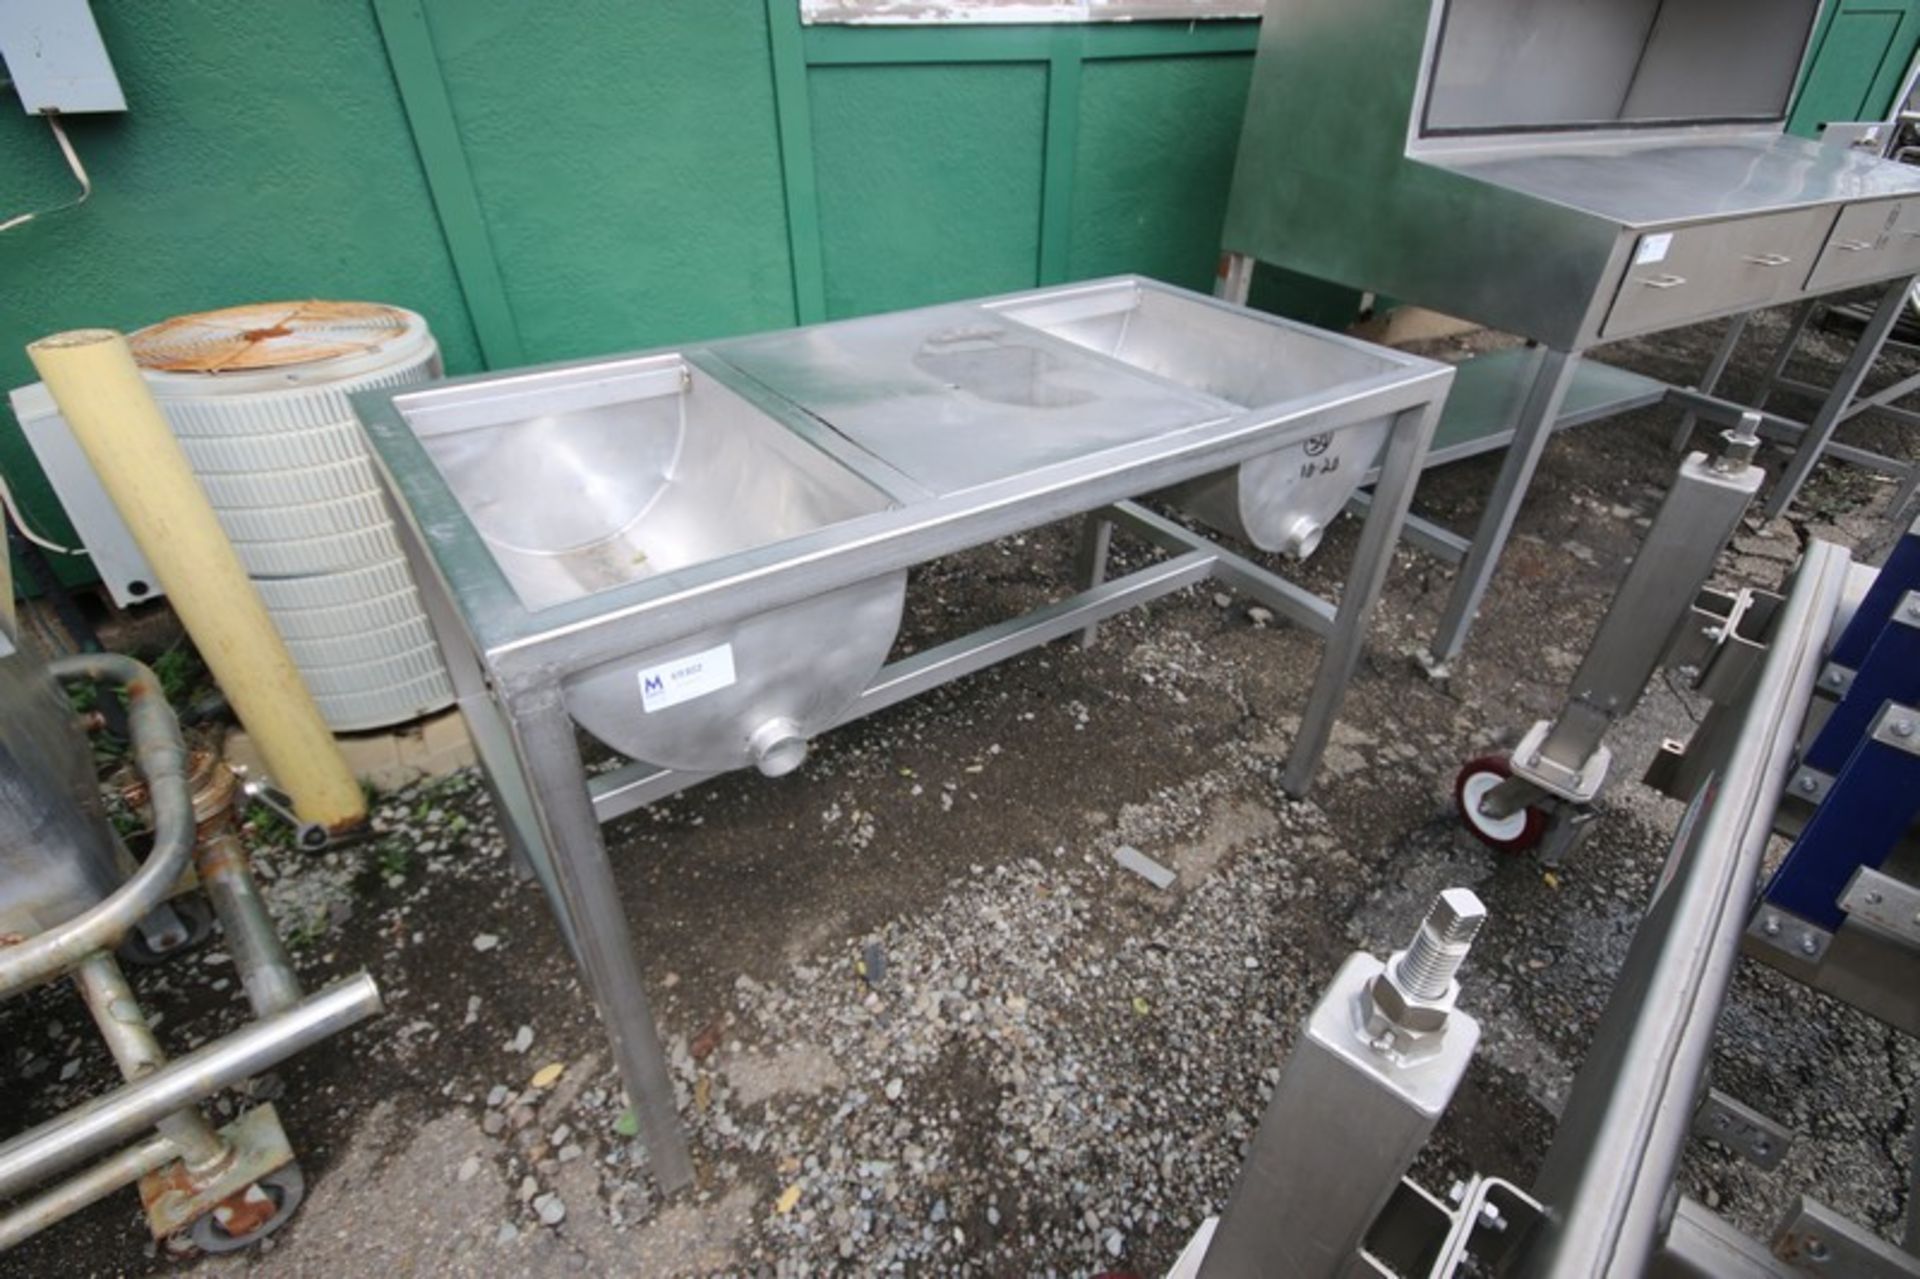 2-Bowl S/S Wash Sink,Overall Dims.: Aprox. 5' L x 30" W x 37" H (INV#69302) (Located at the MDG